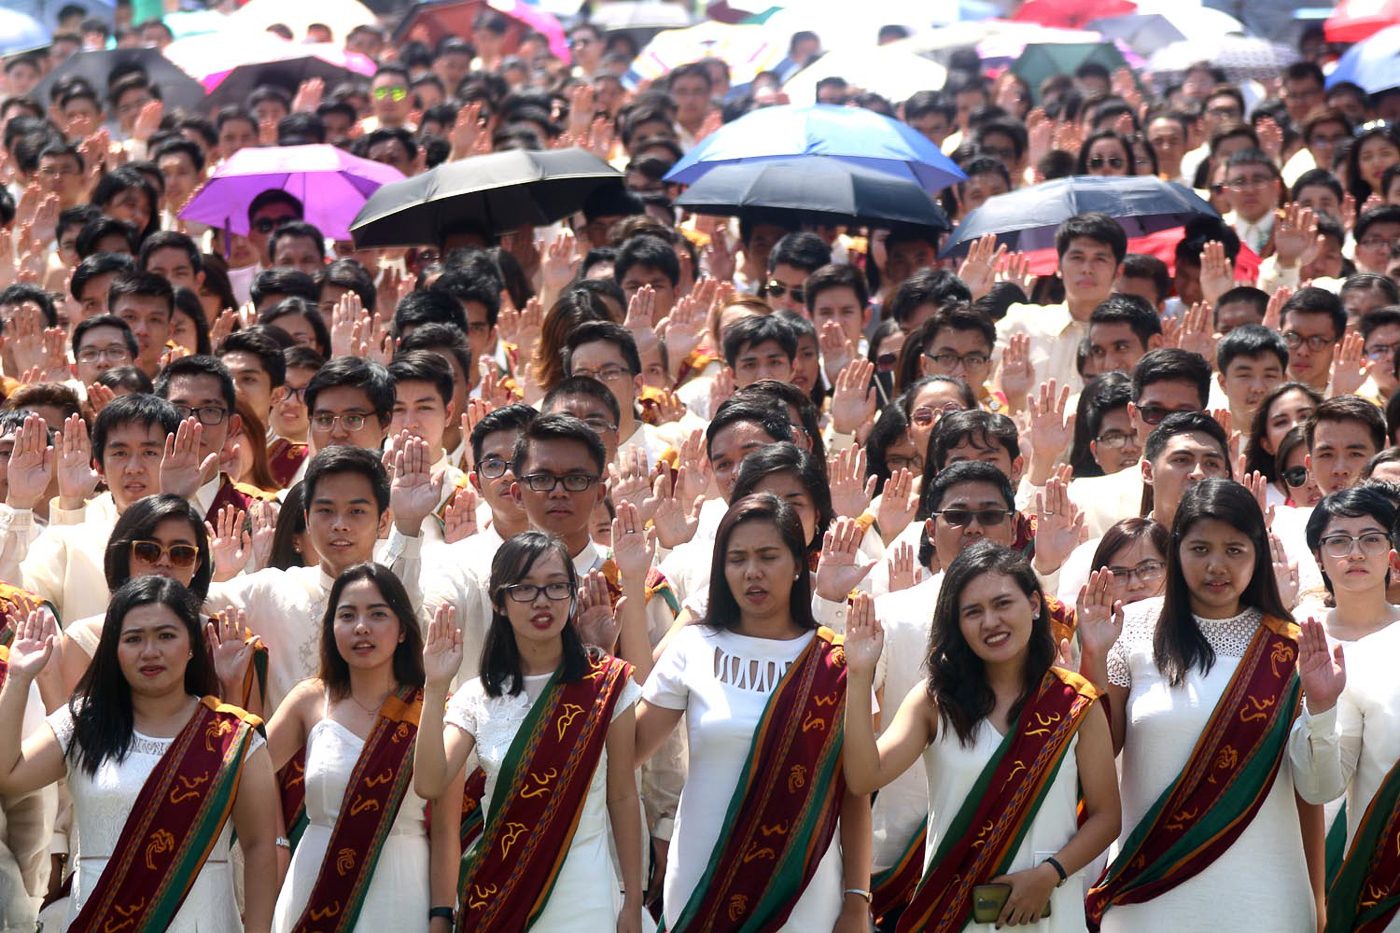 ISKOLAR NG BAYAN. The University of the Philippines Diliman holds its 106th graduation rites on June 25, 2017. Photo by Darren Langit/Rappler 